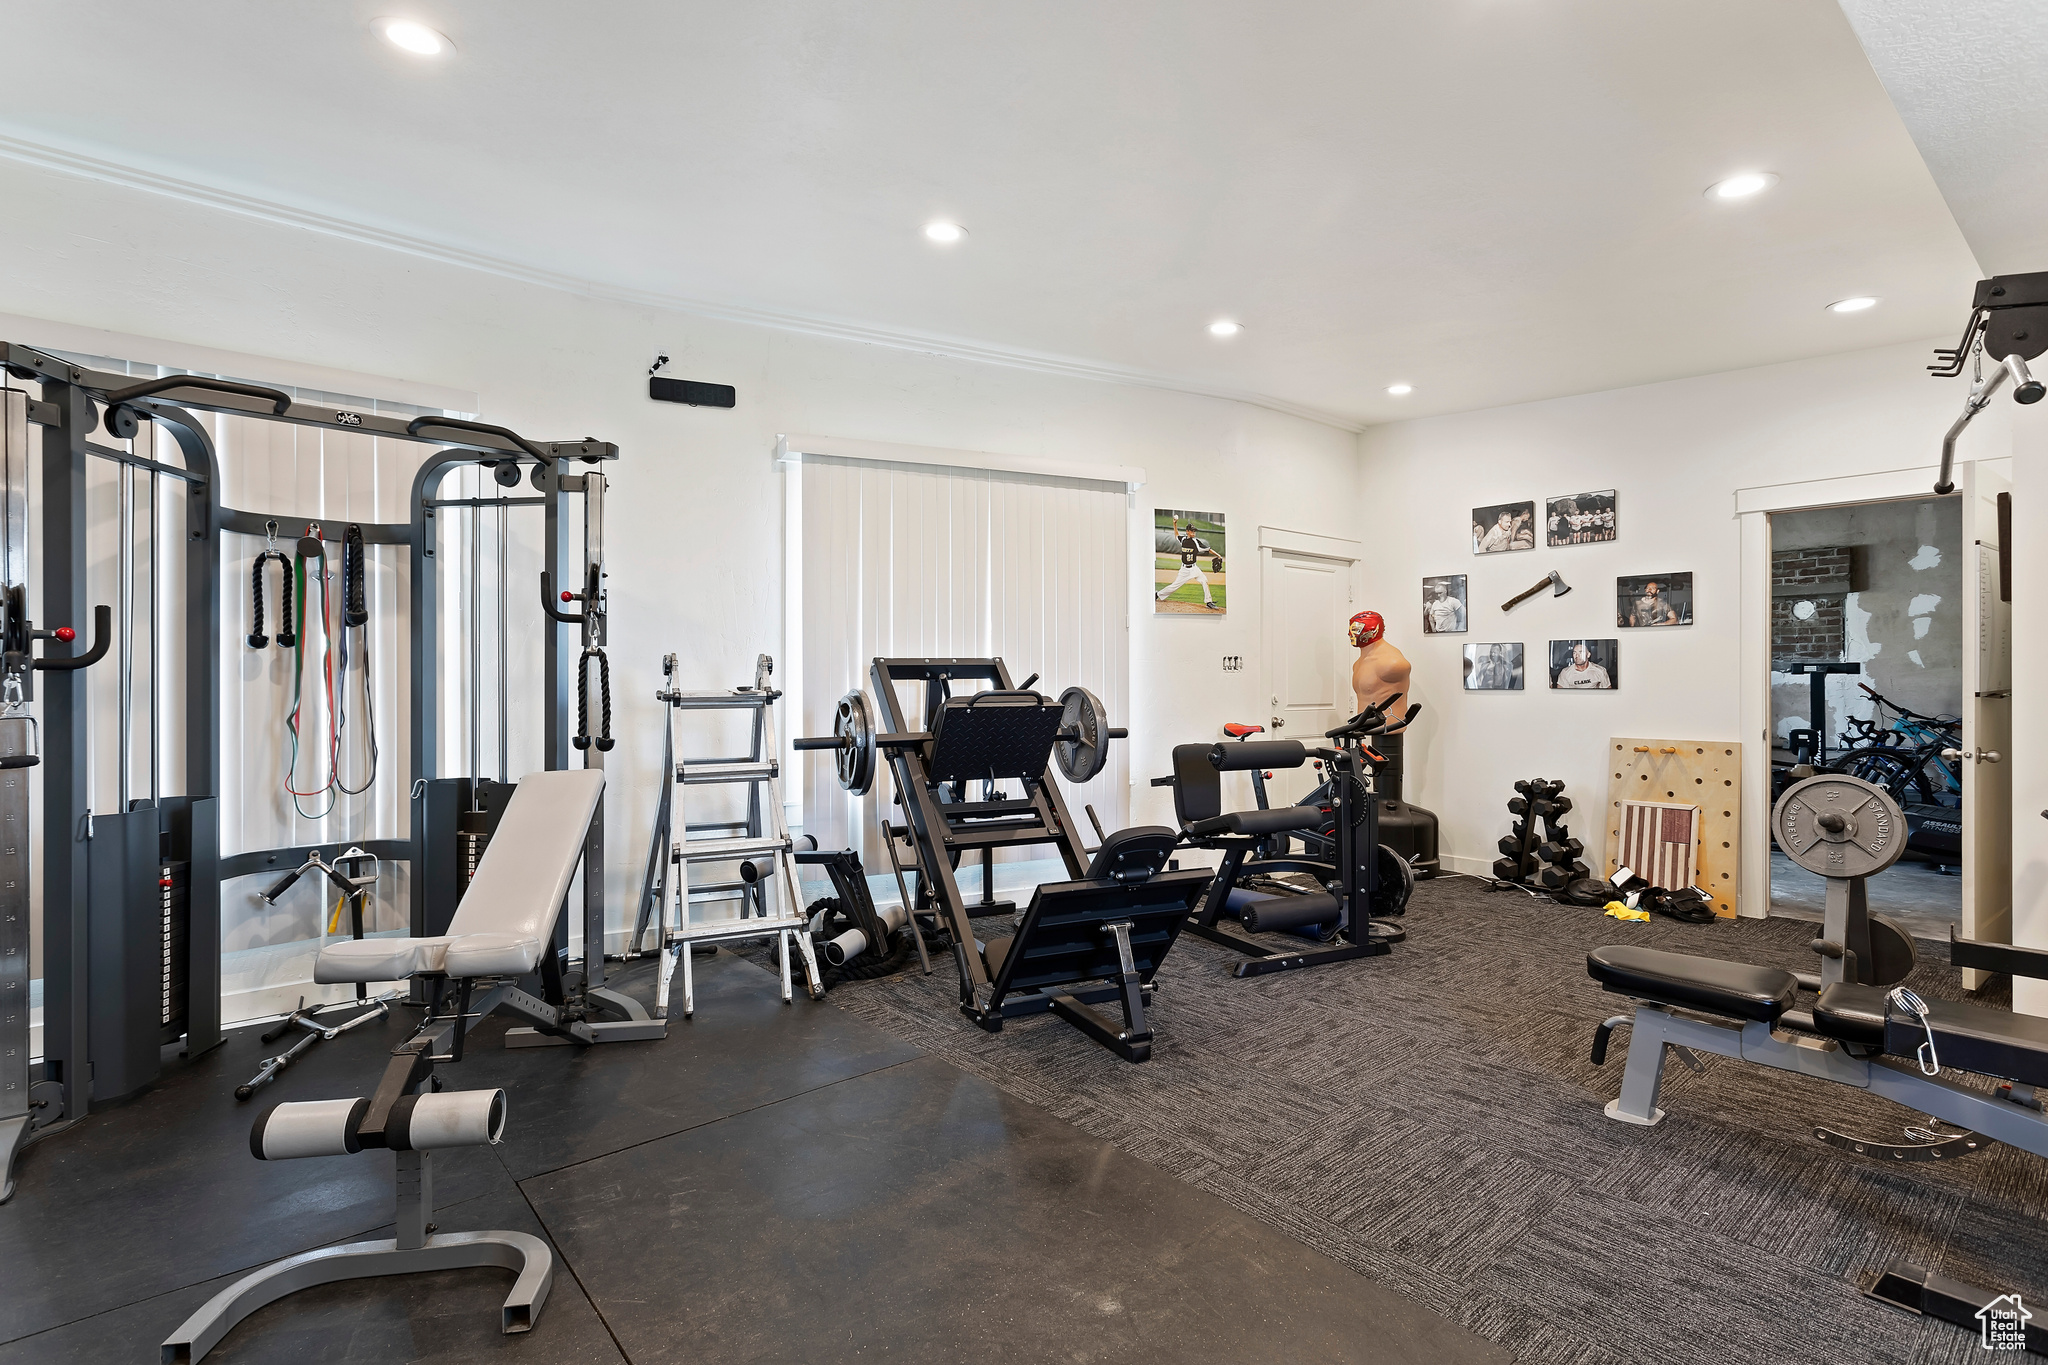 View of workout area in Shop or commercial business